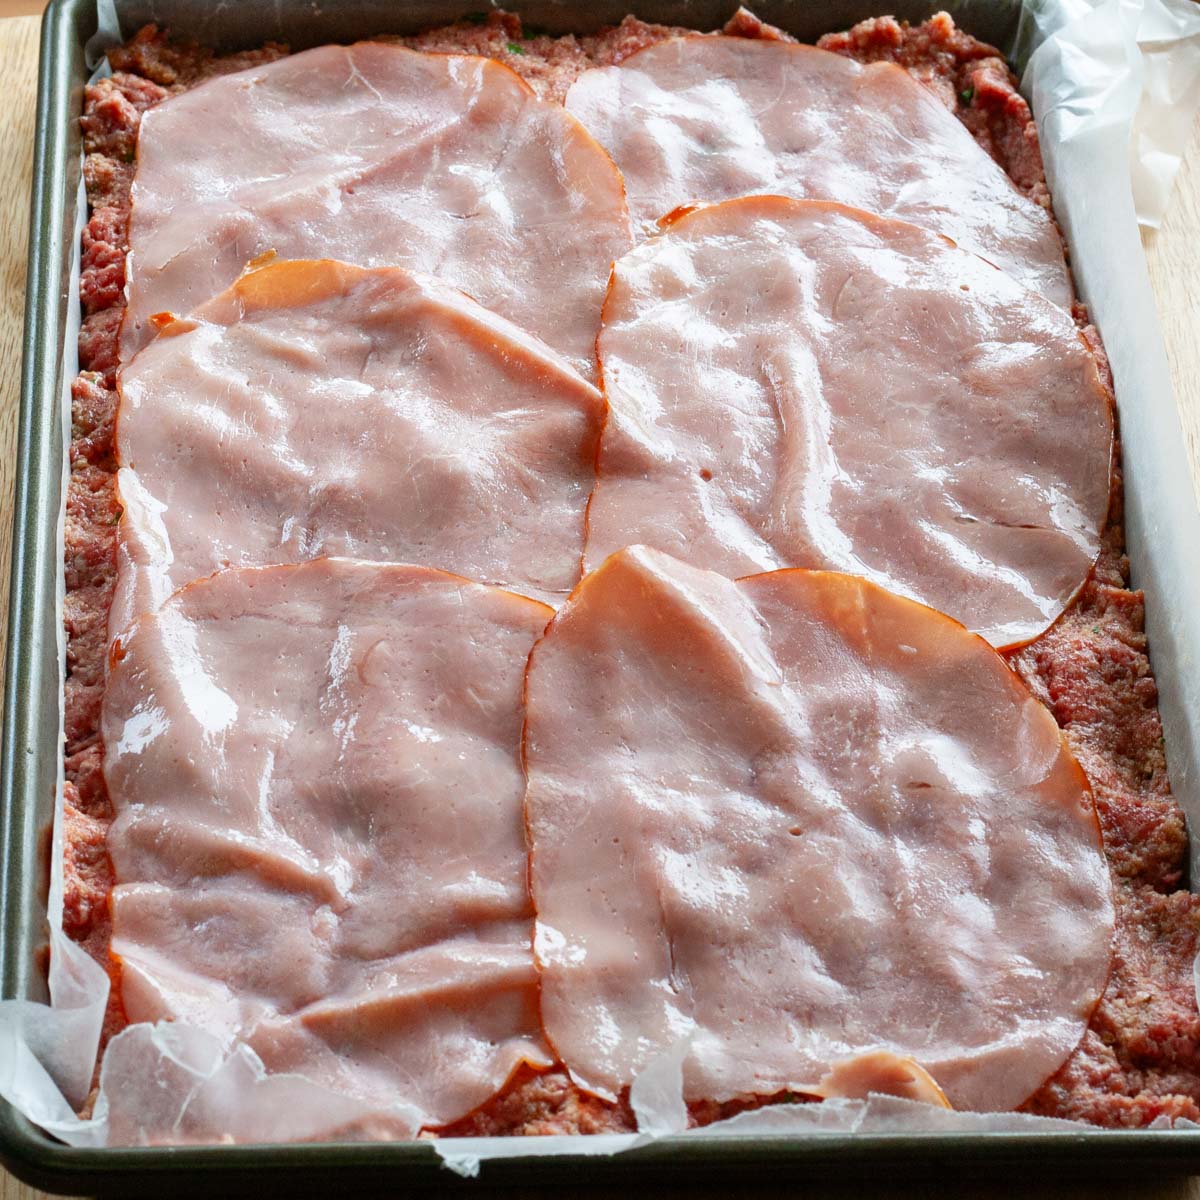 Ground beef mixture in baking sheet topped with ham slices.